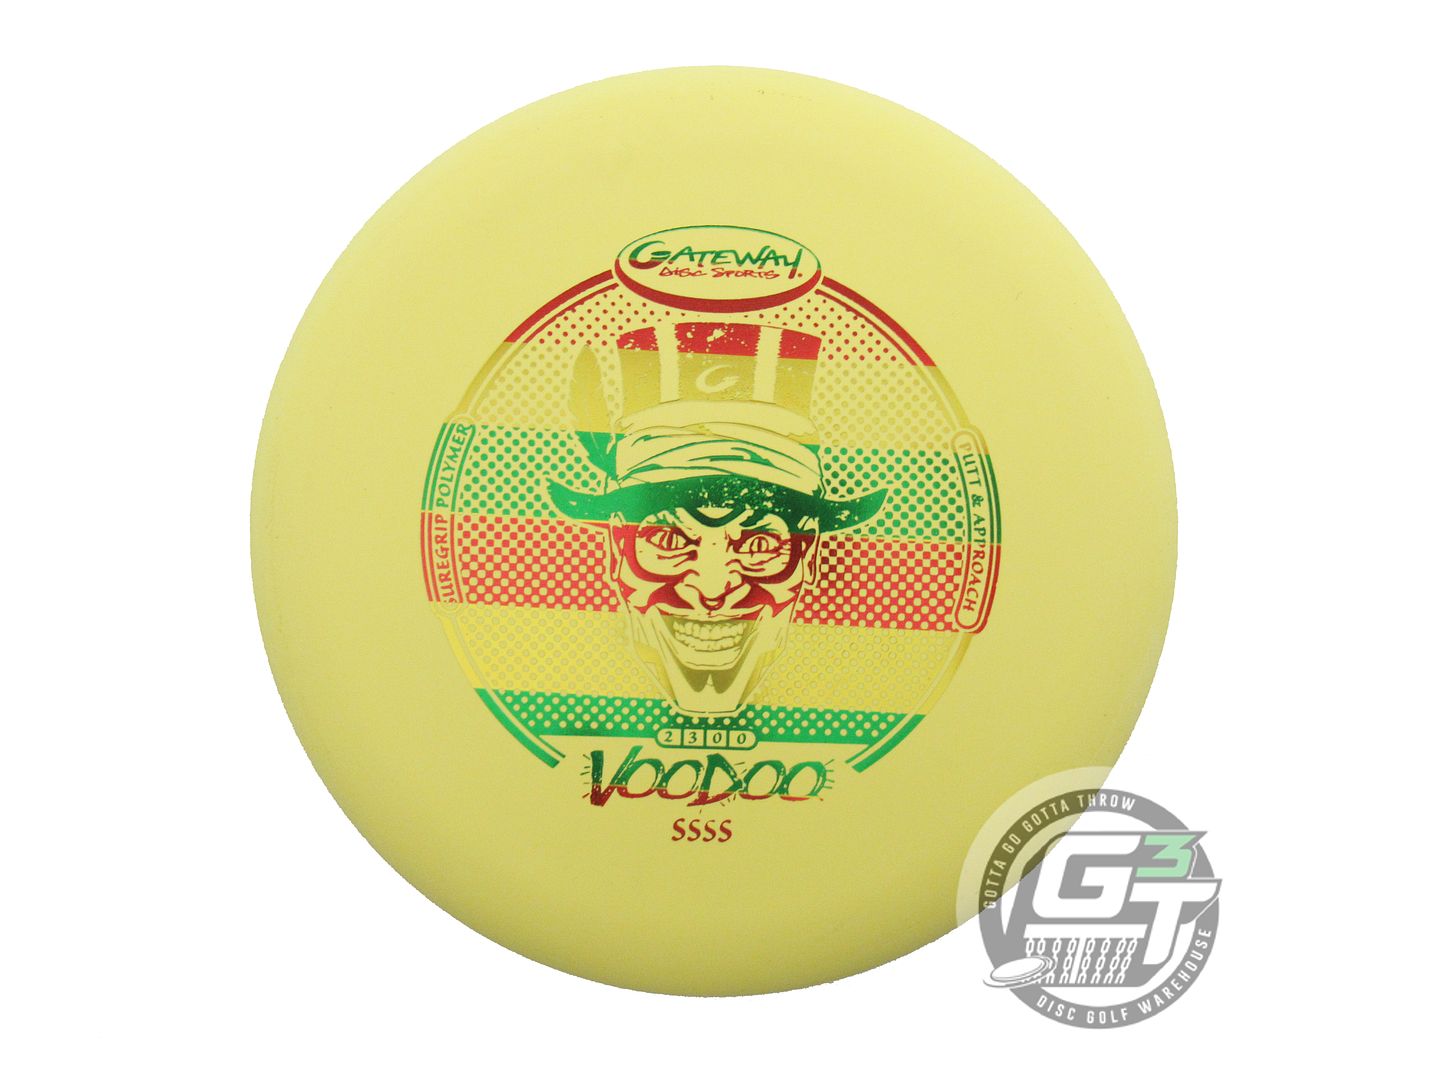 Gateway Sure Grip 4S Voodoo Putter Golf Disc (Individually Listed)